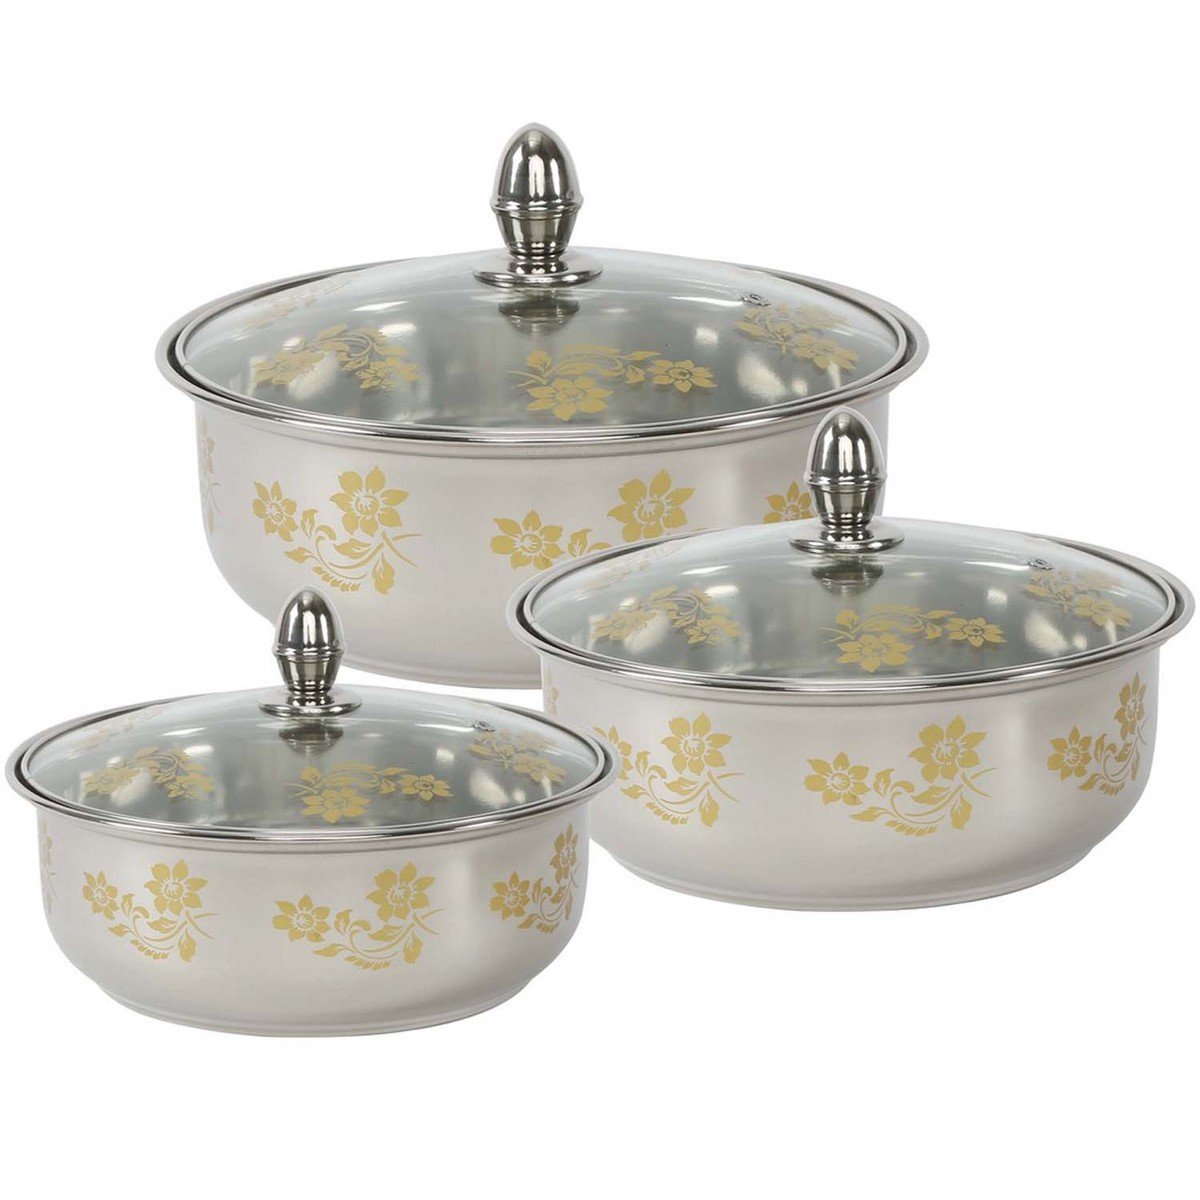 Chefline Stainless Steel Dish With Glass Lid ROZANA 3pcs